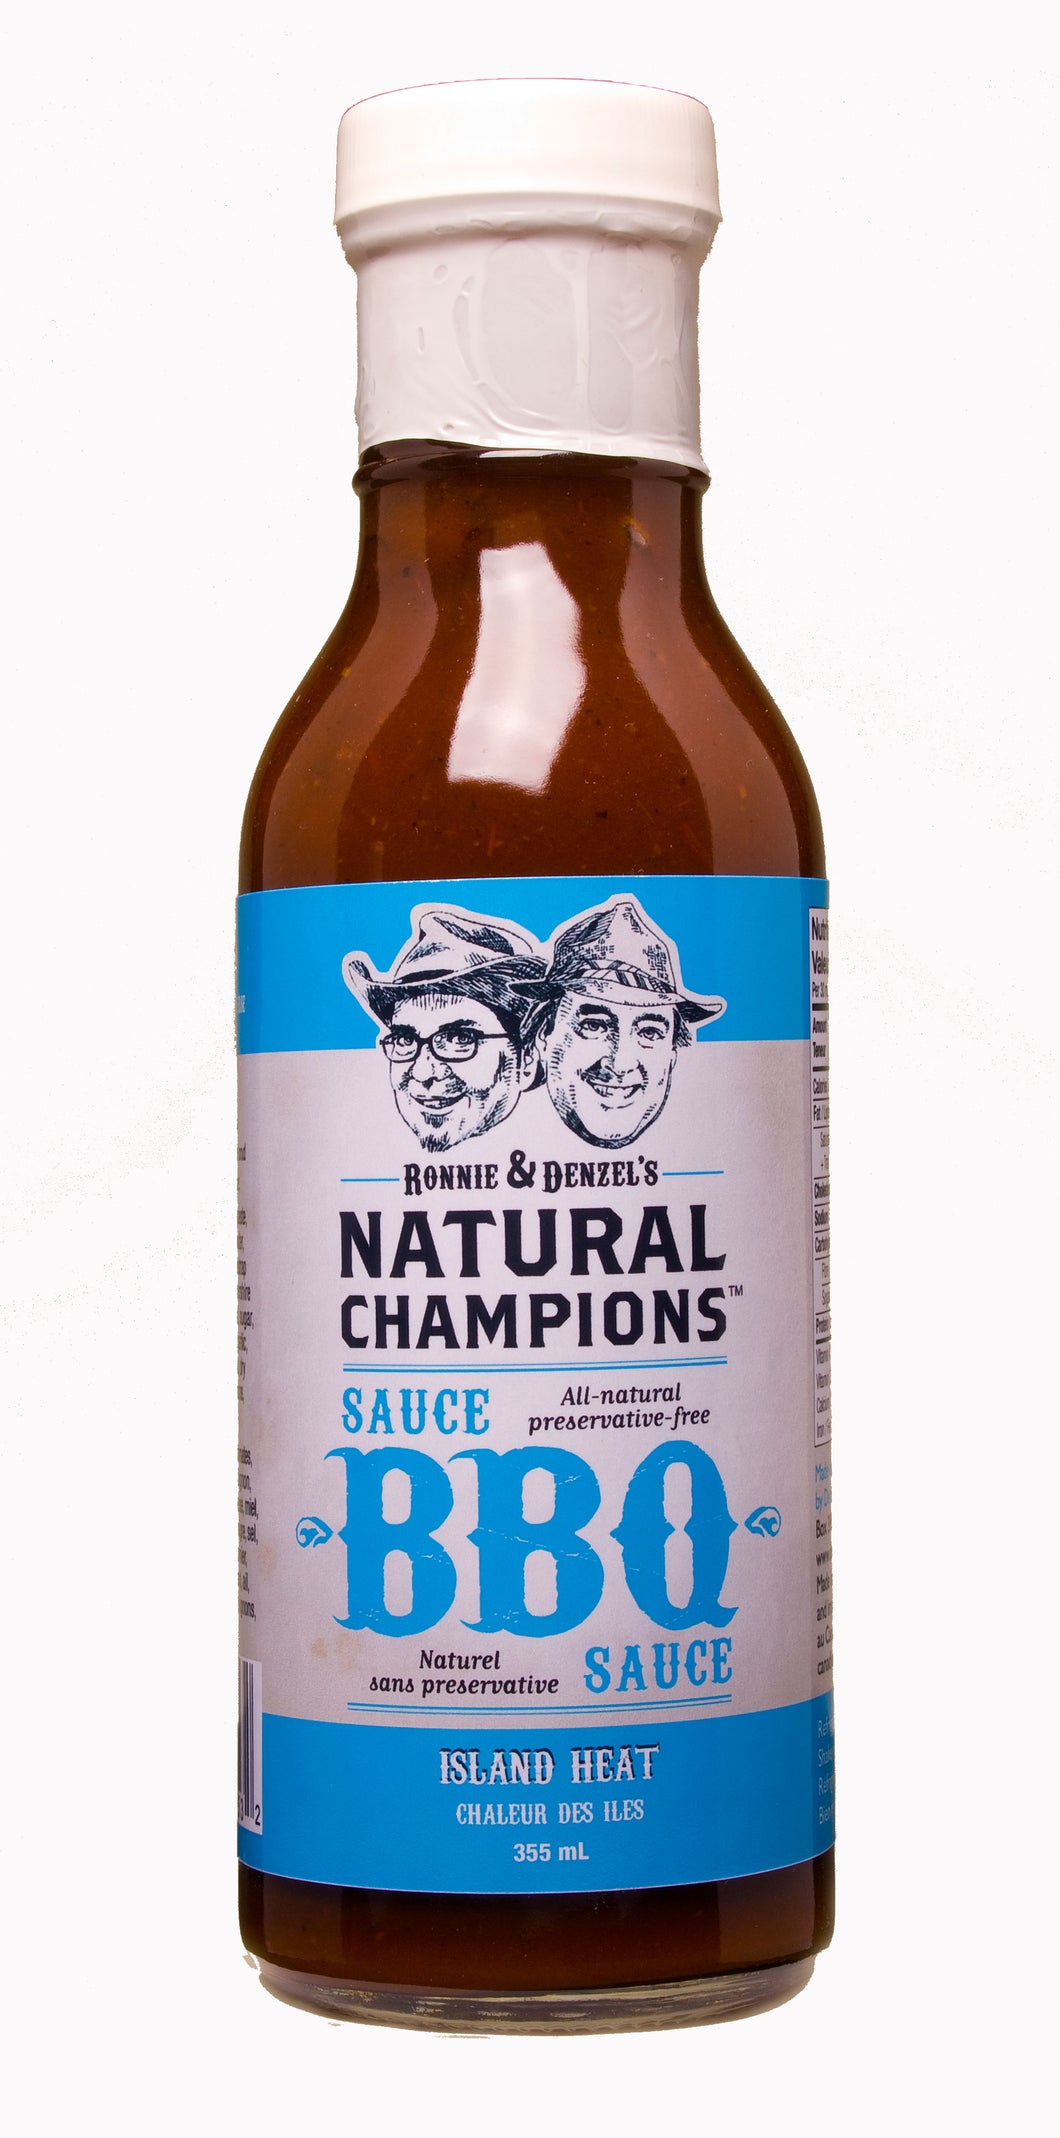 A 355ml bottle of Ronnie and Denzel's Natural Champions Island Heat BBQ Sauce.